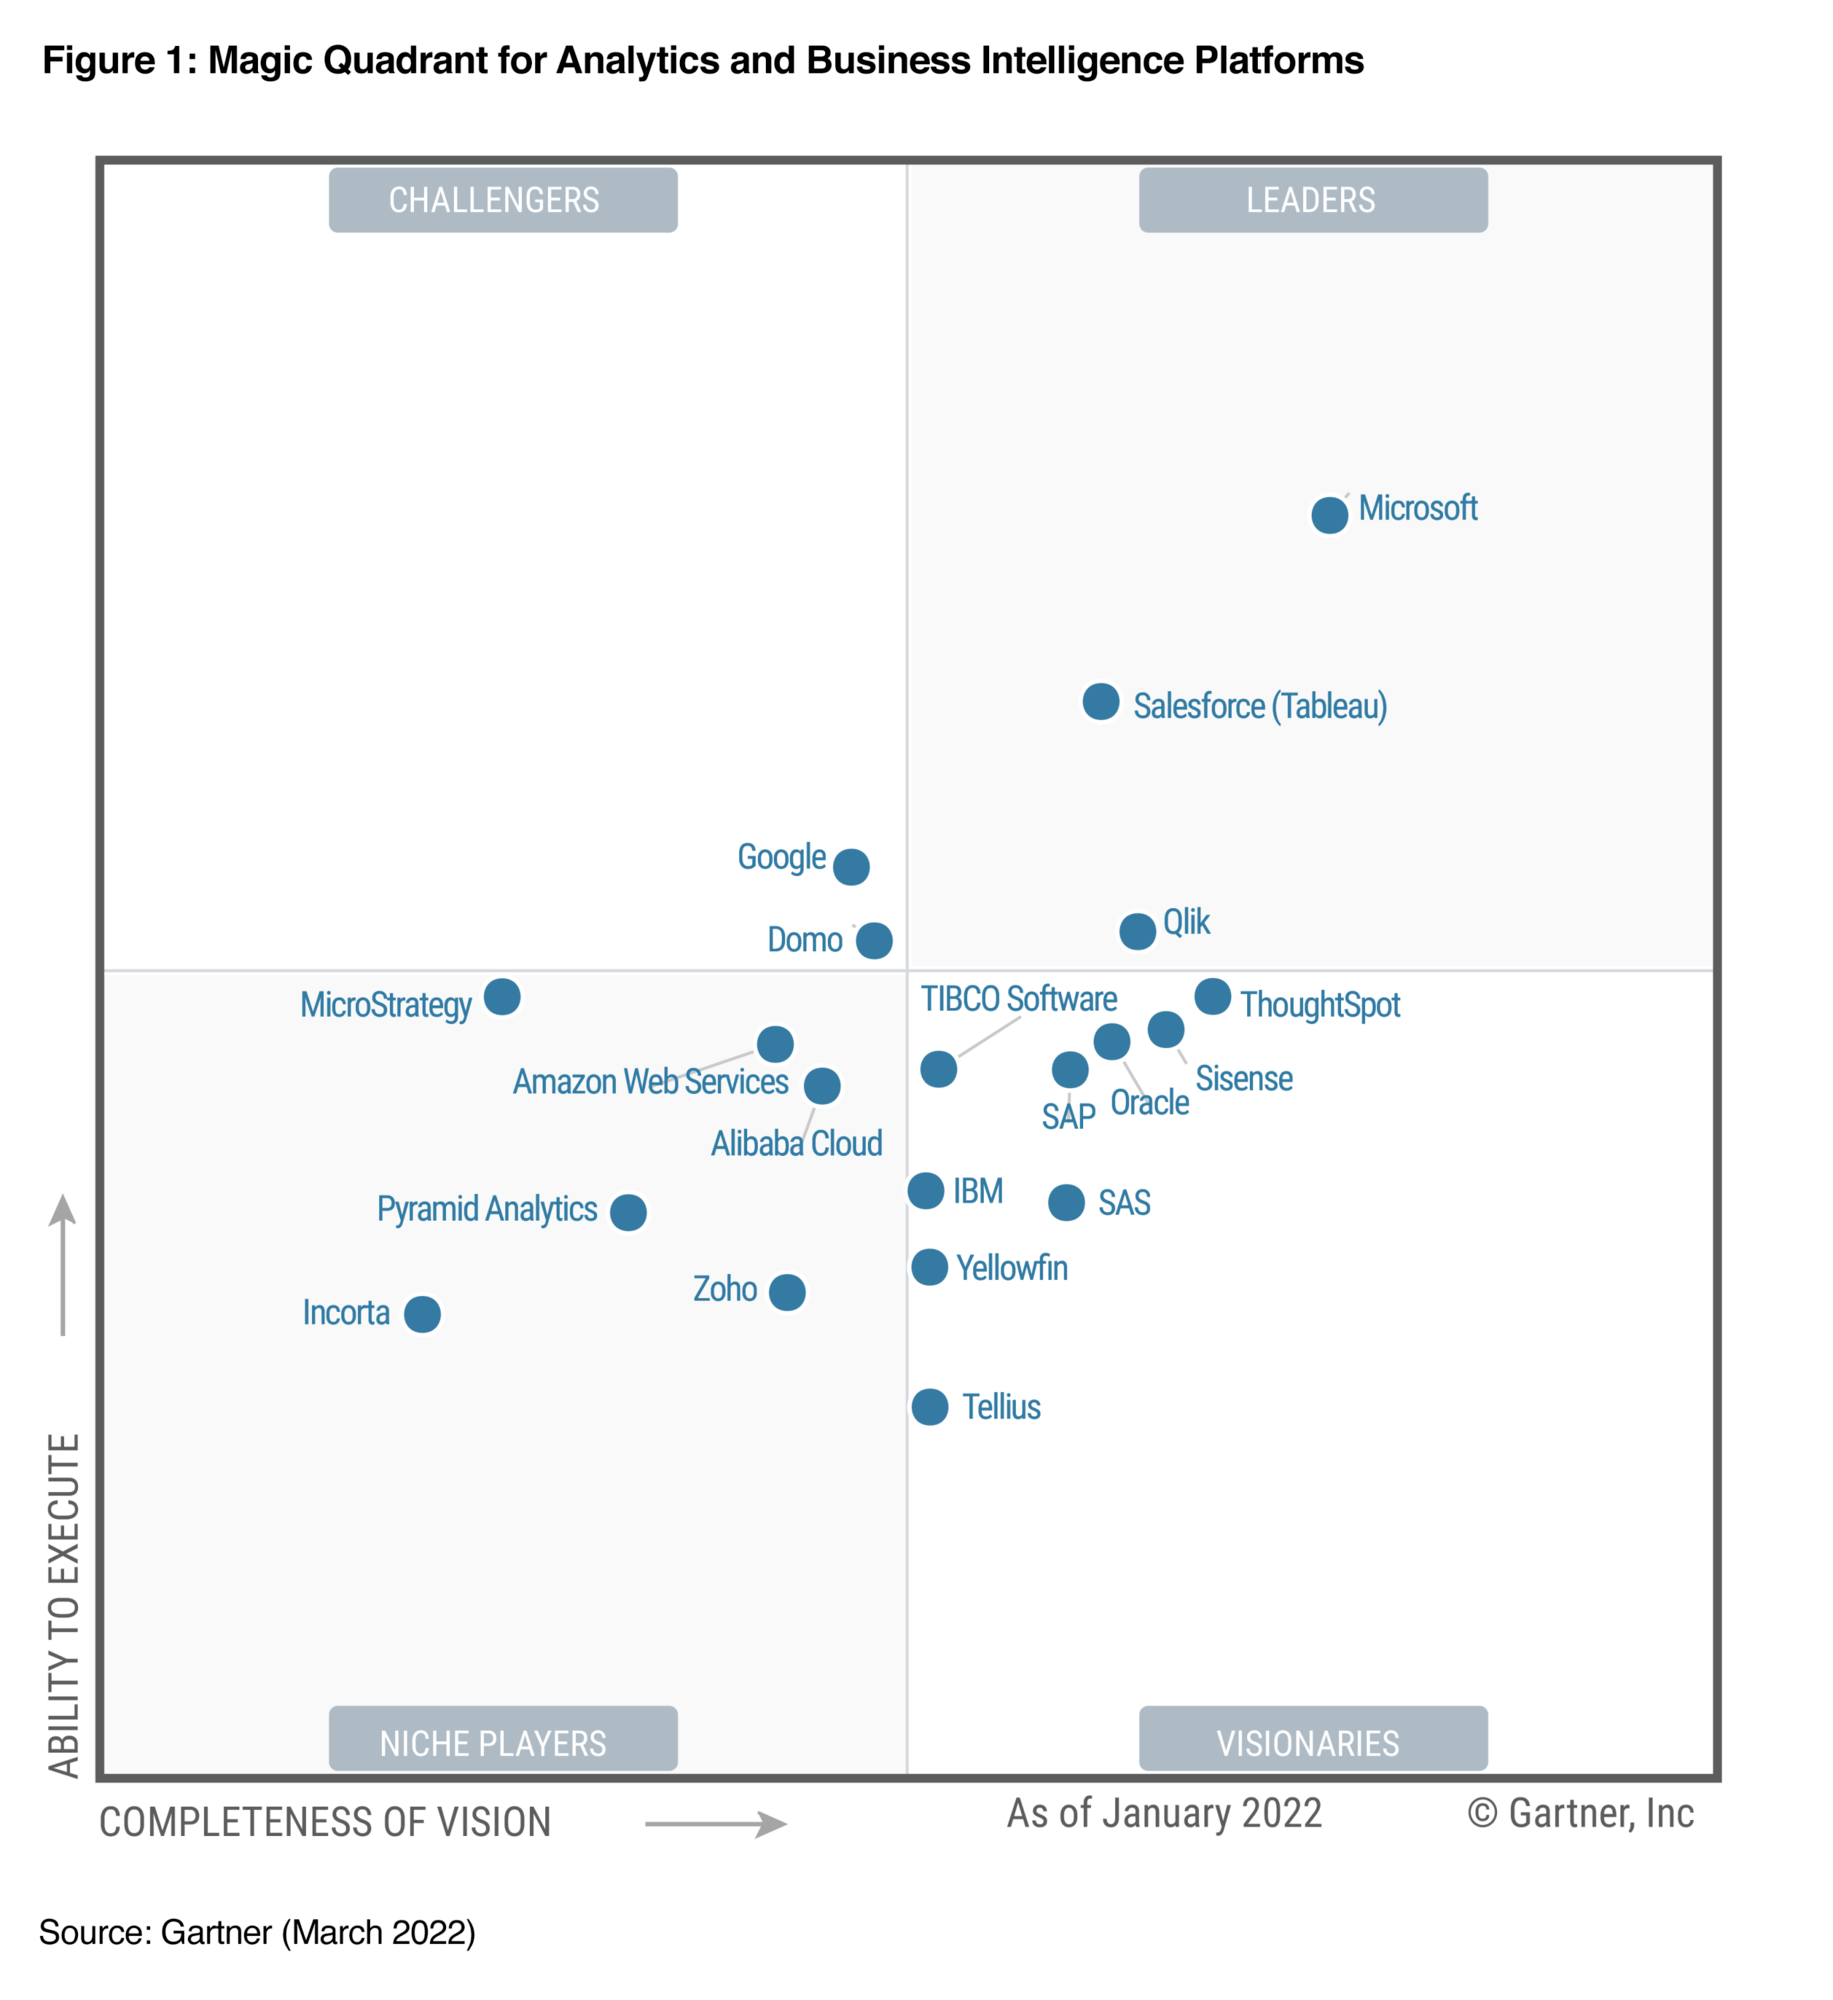 Image of the 2022 Gartner® Magic Quadrant™ for Analytics and Business Intelligence Platforms, showing Salesforce (Tableau) in the Leader quadrant